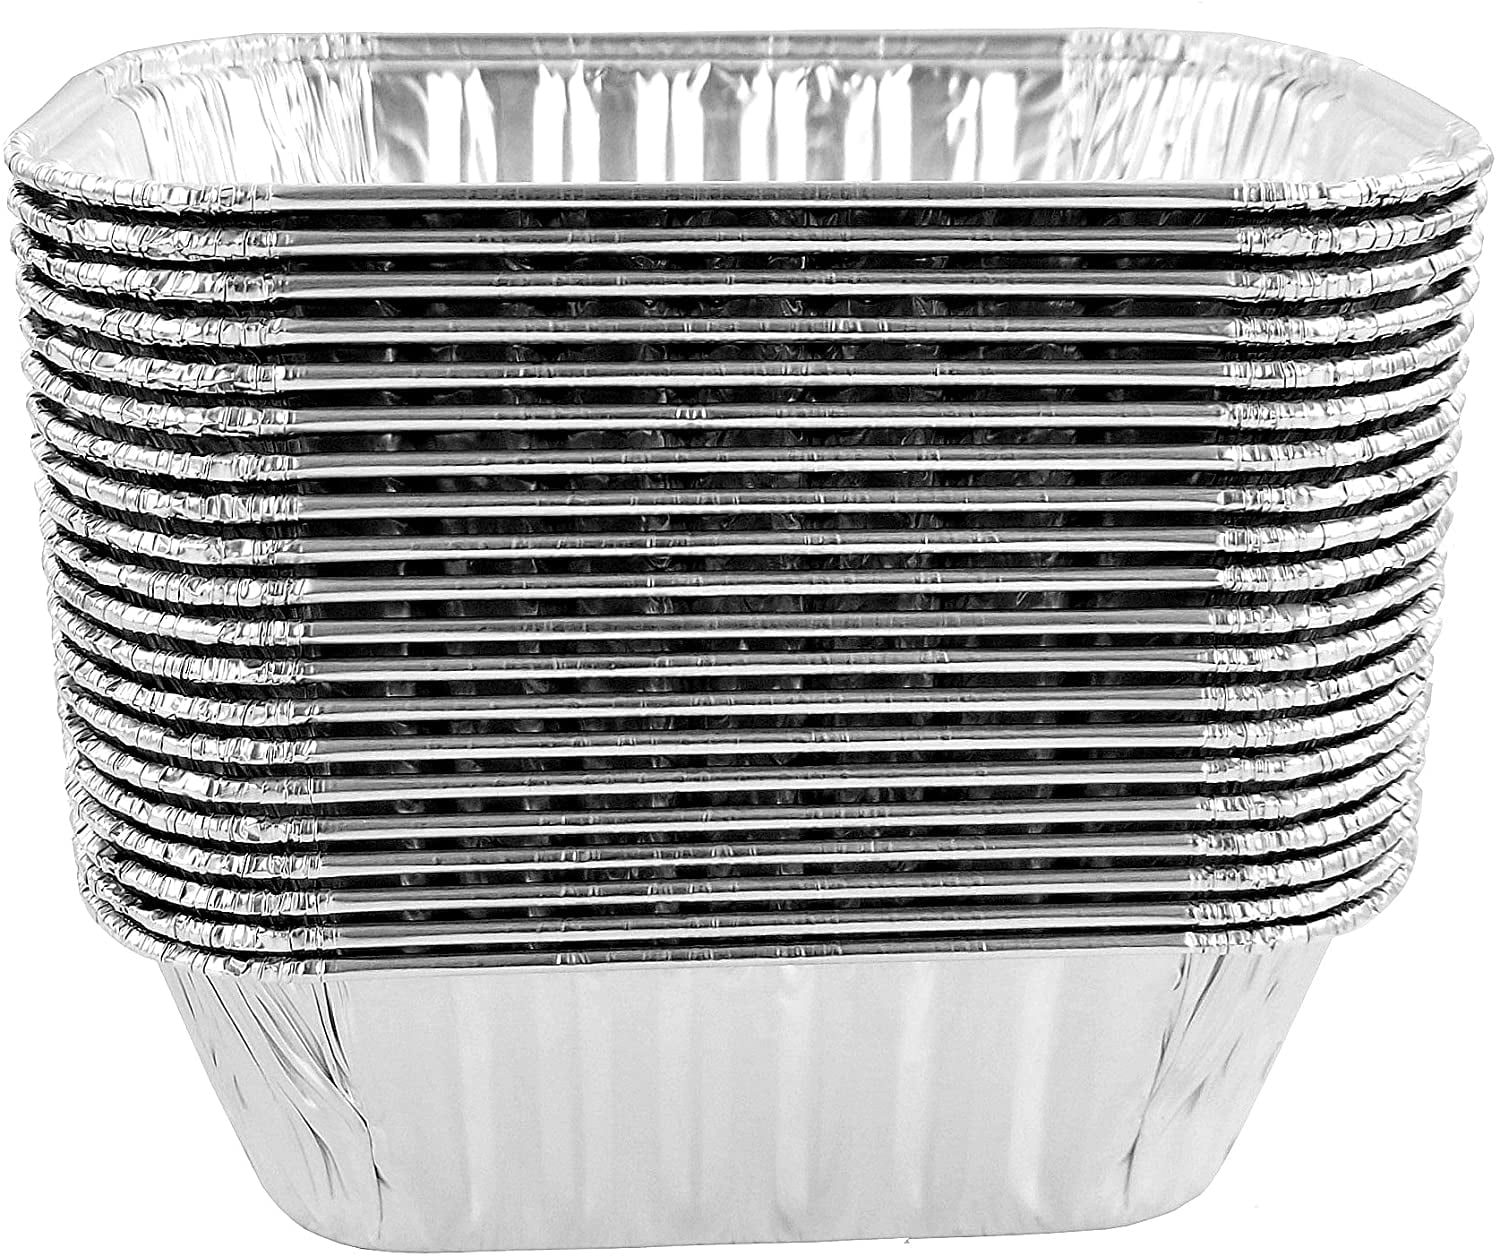 Stock Your Home 1 Lb Aluminum Foil Mini Loaf Pans (30 Pack) Disposable  Small Loaf Pan – 1 Pound Baking Tin Liners, Perfect to Bake Cakes, Bread